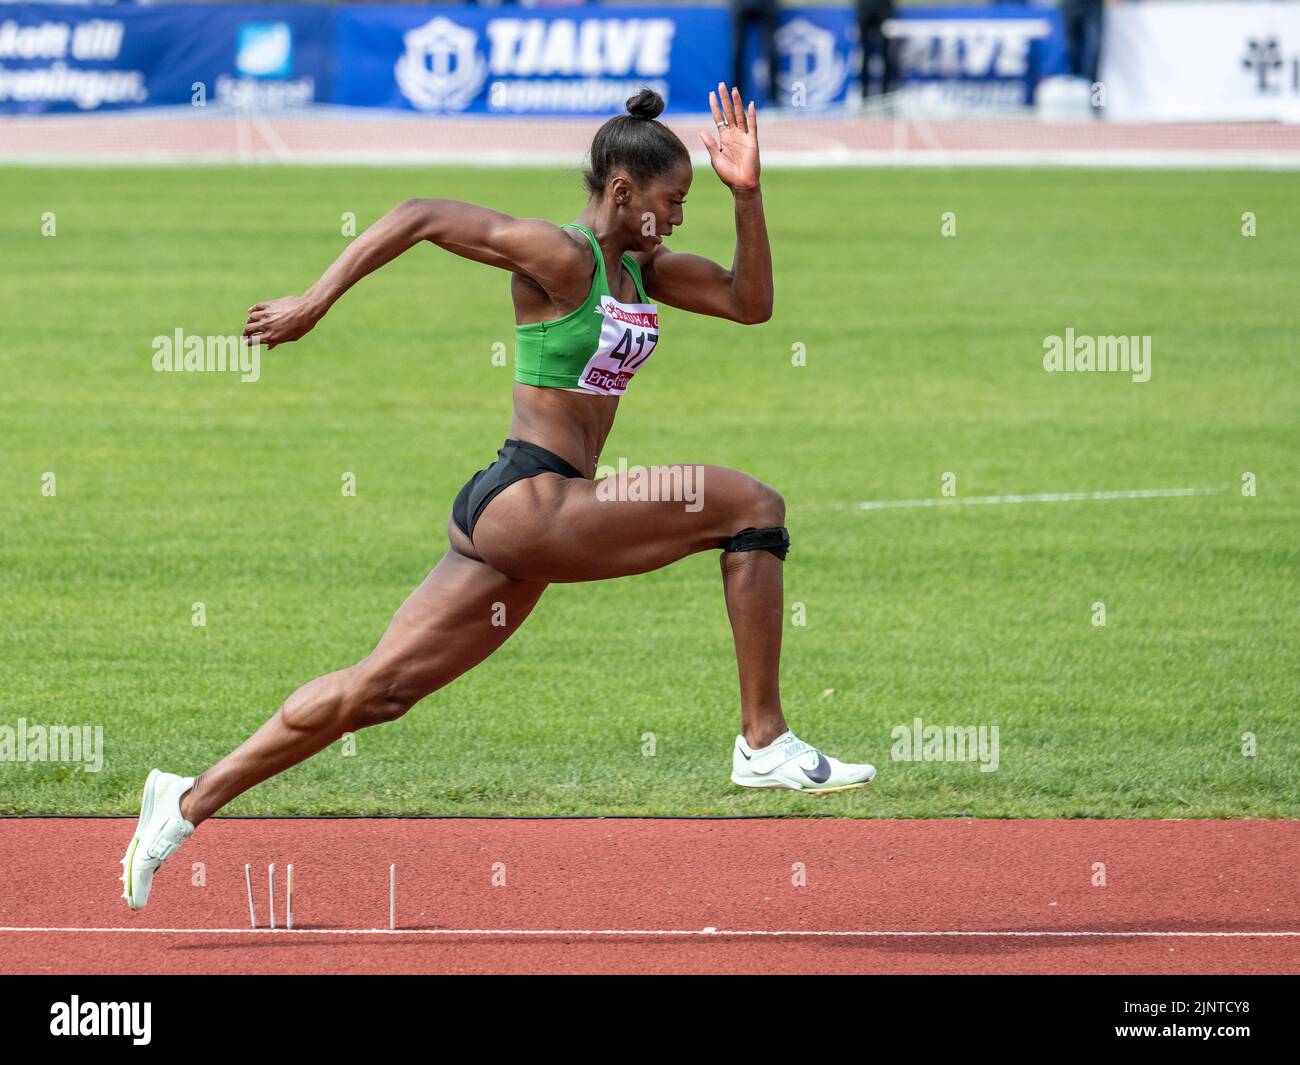 Swedish long jumper Khaddi Sagnia running for a jump. She is currently one of the best long jumpers in the world. Stock Photo